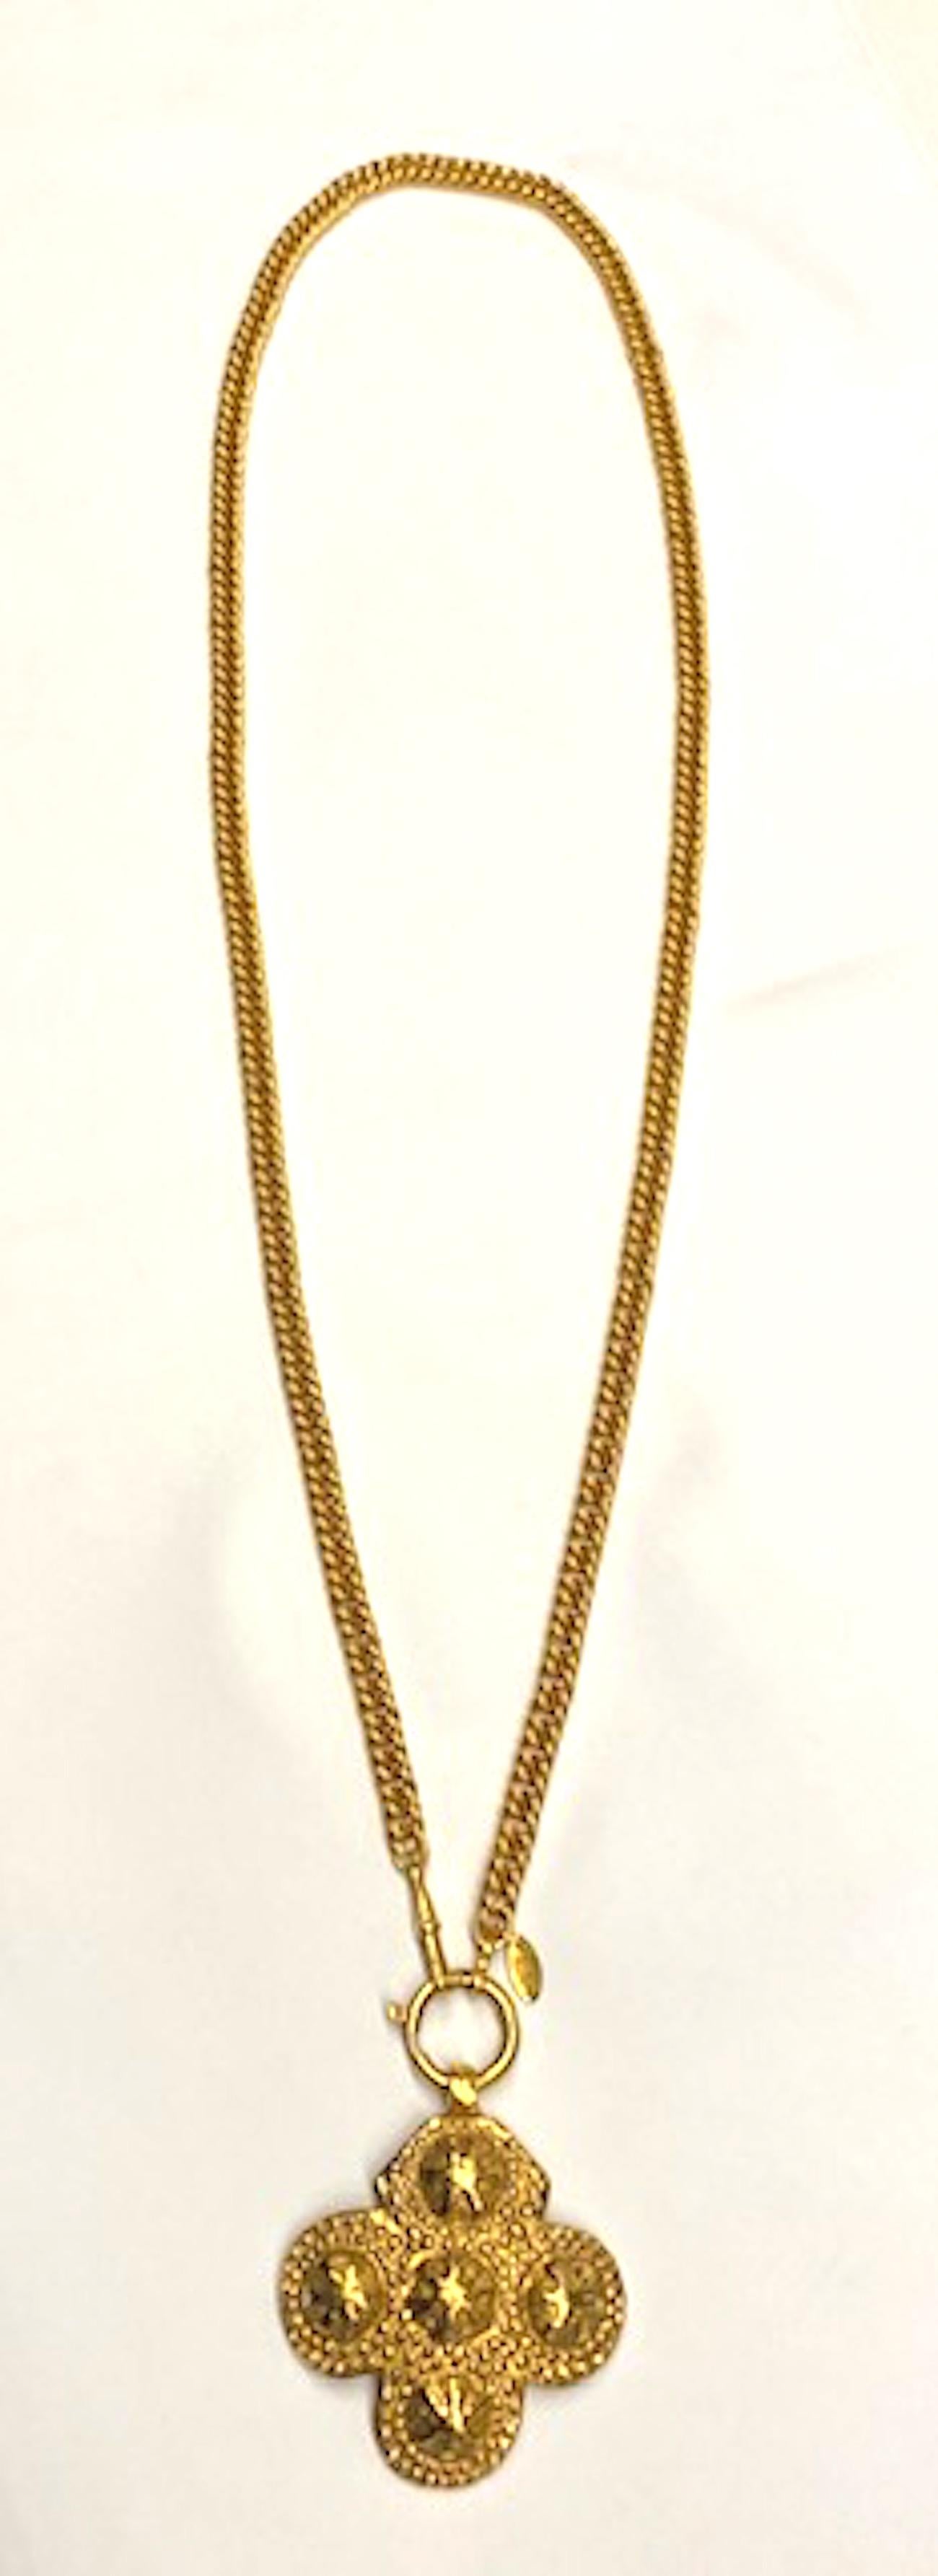 A very beautiful Chanel pendant necklace rich gold patina from 1986. The curb link chain is 34 inches long and .32 of an inch wide. It is a watch chain style with large jump ring on one end and an Albert watch clasp on the opposite end. The large